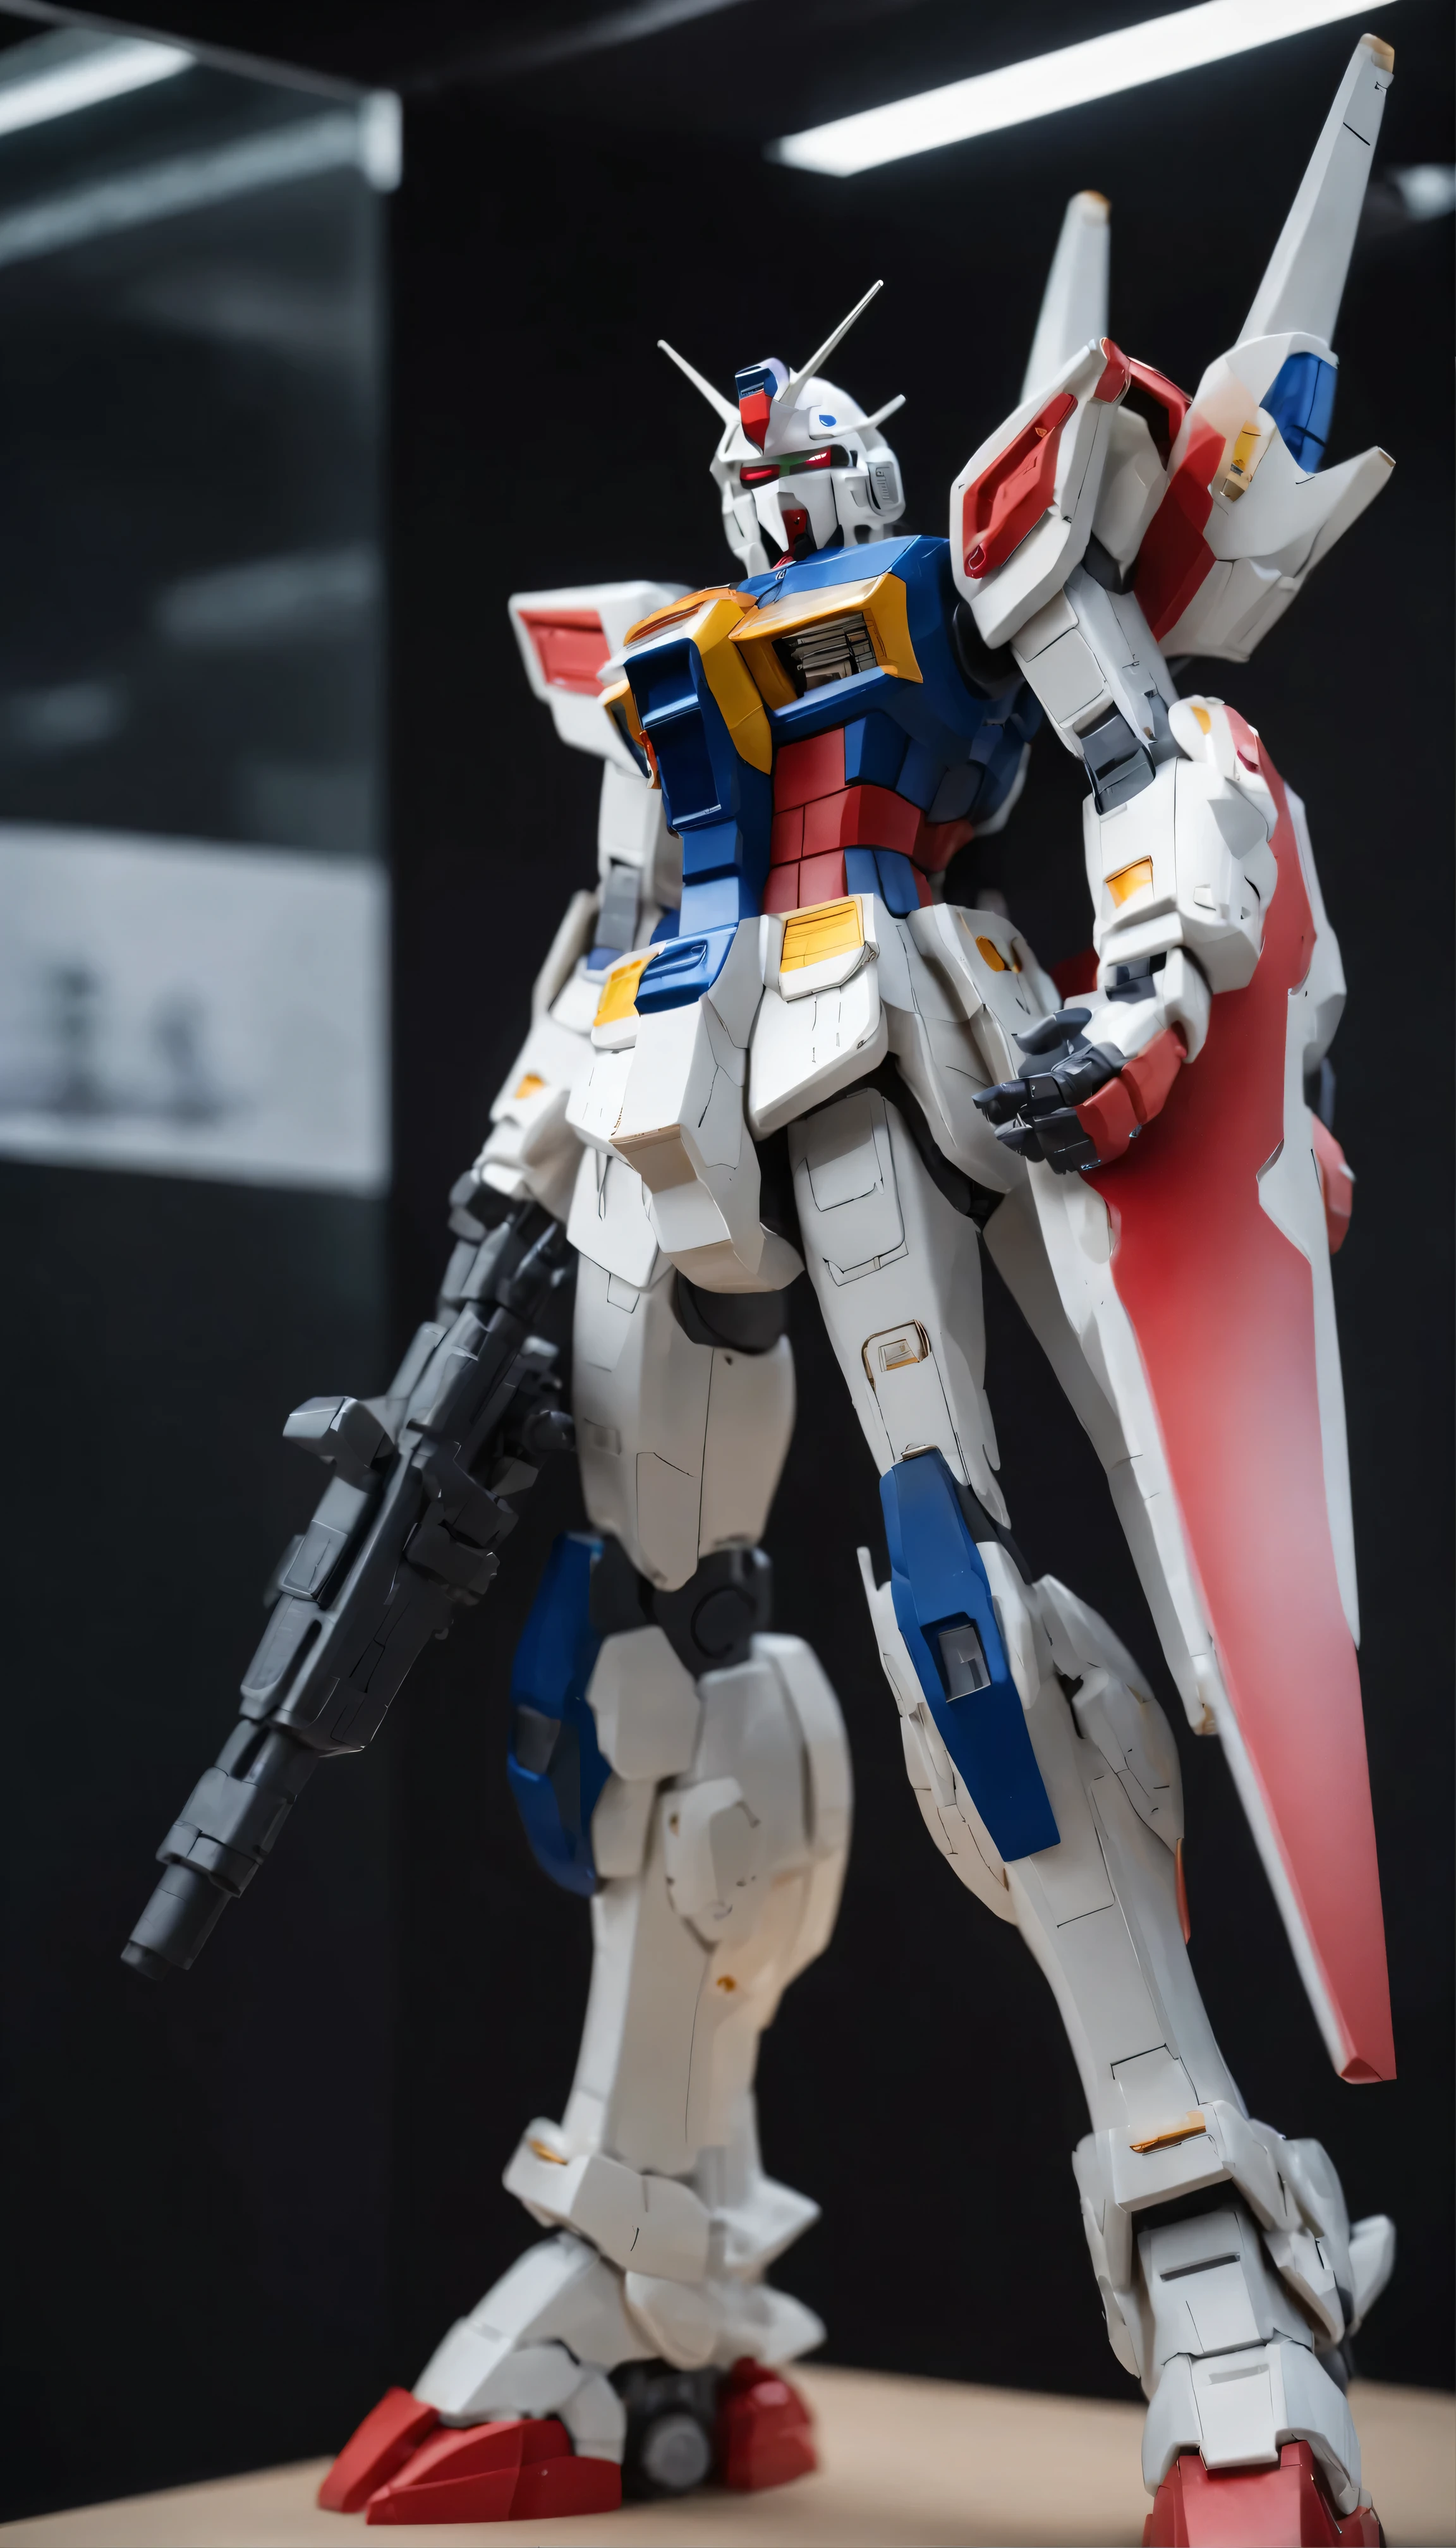 Anime Gundam figures with intricate details and high definition images、Presenting a towering robot figure in full-body, 3D-accurate content。Each panel and joint is carefully crafted、Crafting iconic designs with exceptional precision and quality。The figure is tall and imposing.々and、We are ready to protect the universe in the best possible way.。 Adult bedrooms are clean and tidy.、The large windows offer a view of the outside.。Gundam memorabilia decorates the walls.、The LED light display creates a sense of realism。In the center of the room、There are life-sized Gundam figures on display.、